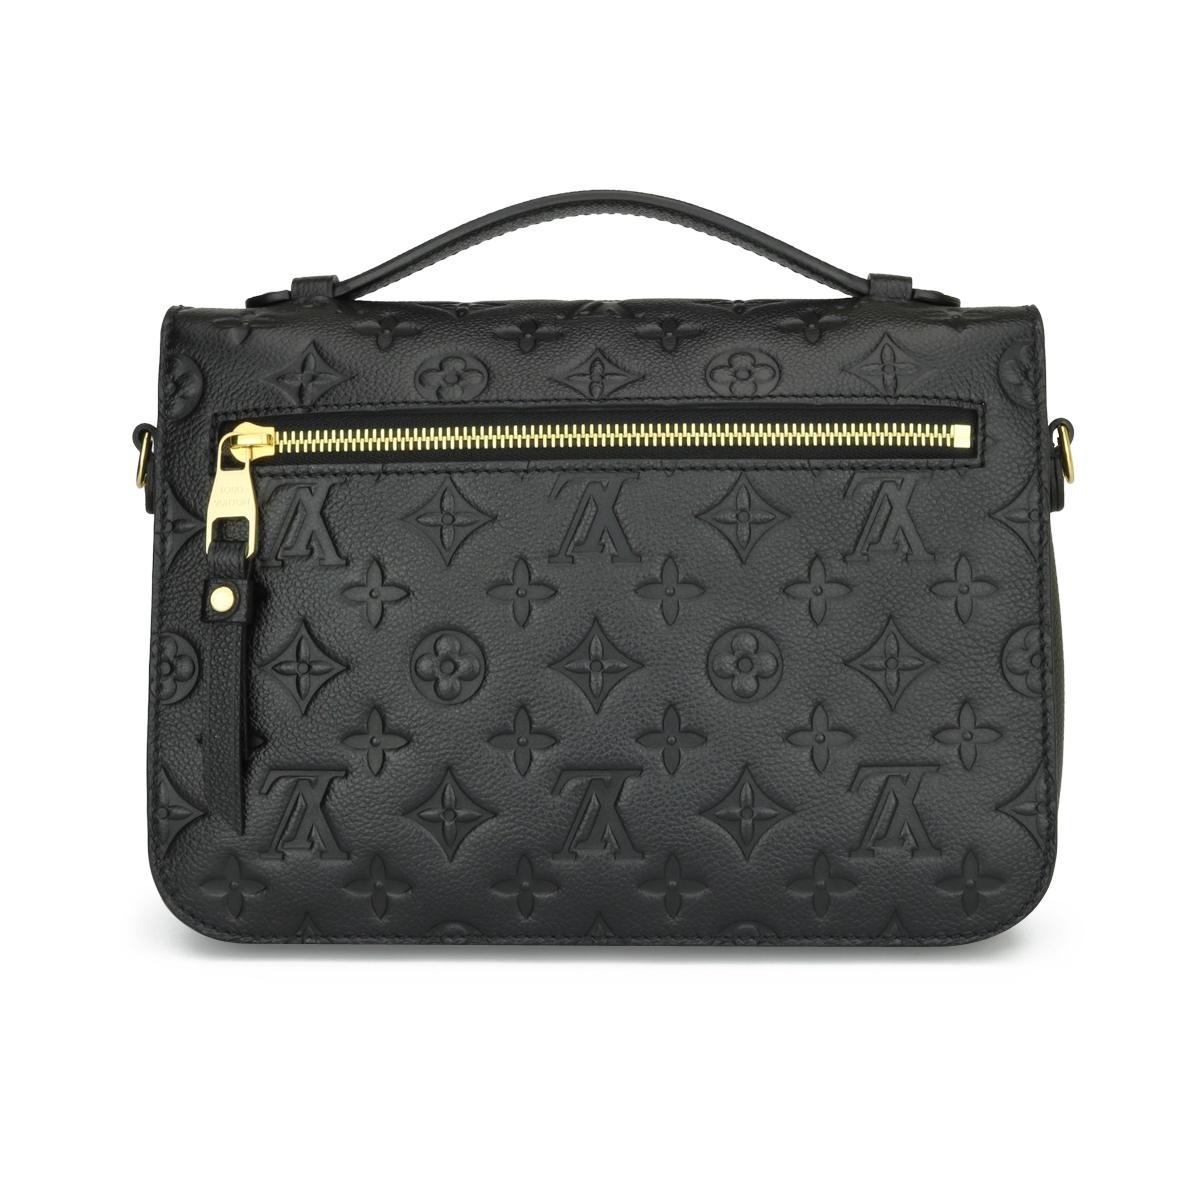 Louis Vuitton Pochette Métis Bag Black Monogram Empreinte Leather with Gold Hardware 2017.

This bag is in excellent condition.

- Exterior Condition: Excellent condition, corners show no visible signs of wear. Outside of the bag shows very minor